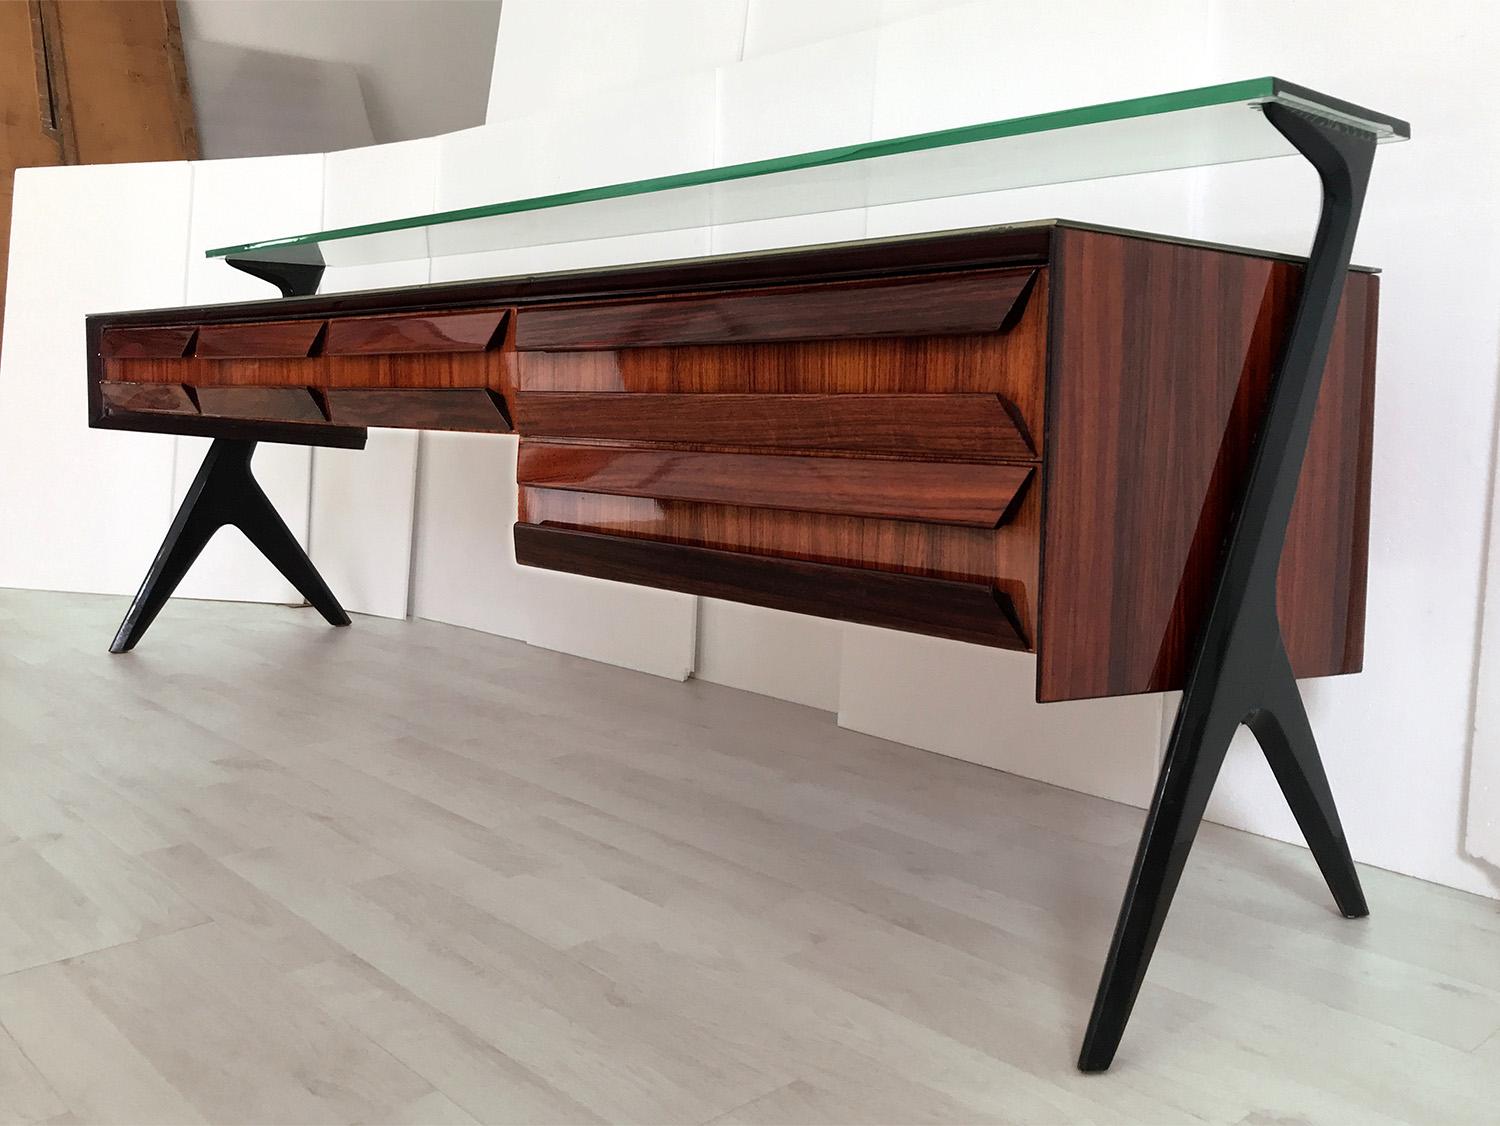 Mid-20th Century Italian Mid-Century Sideboard or Vanity Dresser by Vittorio Dassi, 1950s For Sale